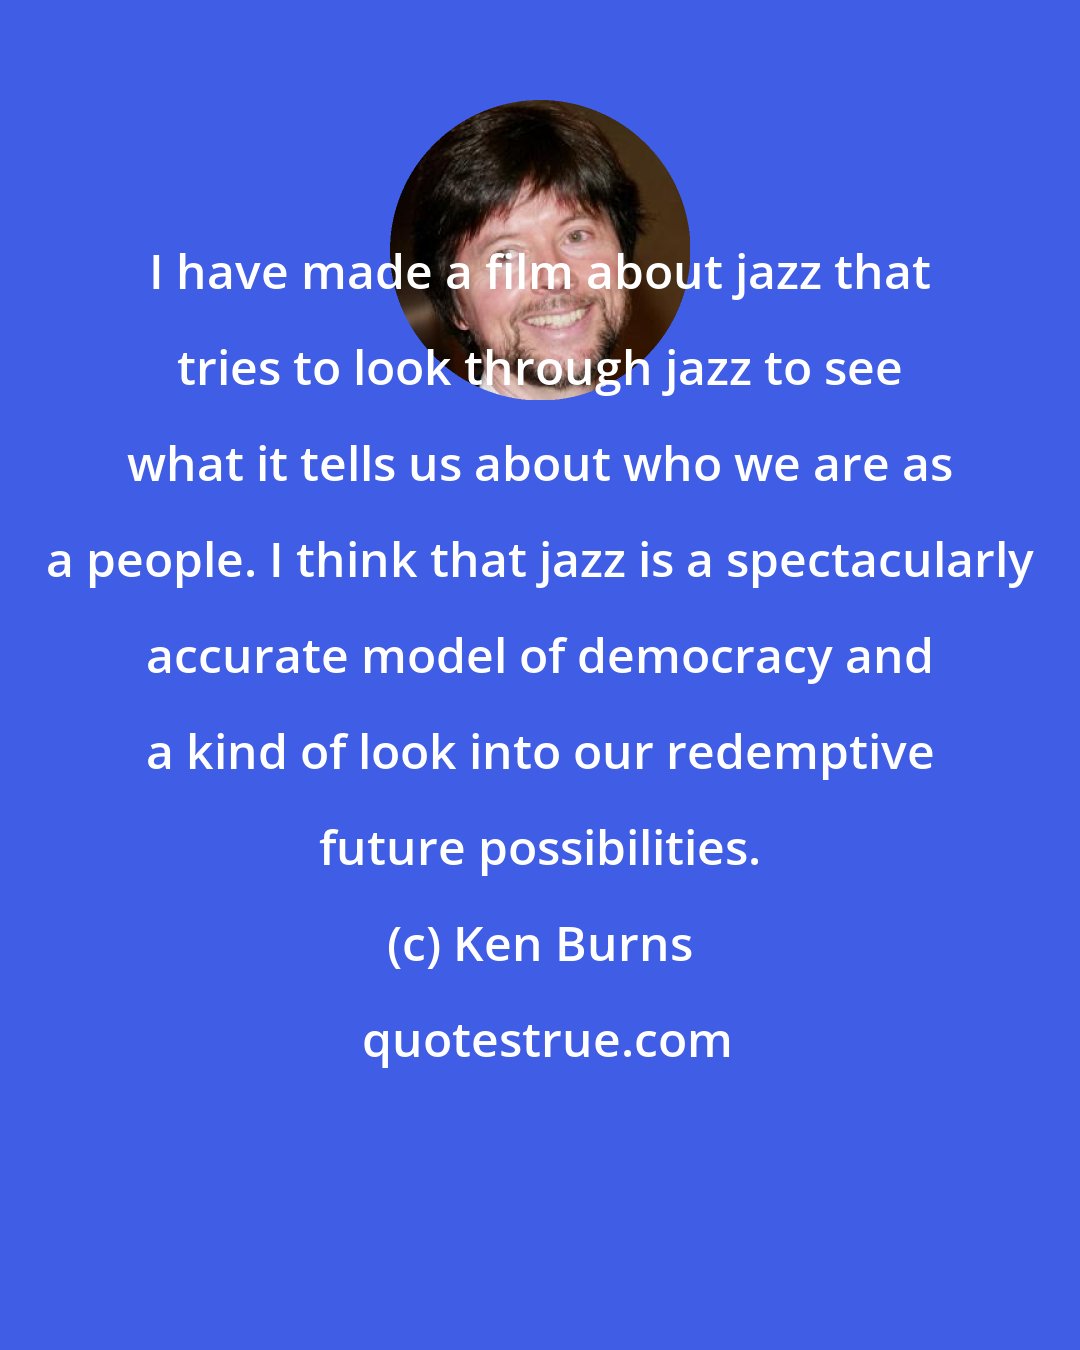 Ken Burns: I have made a film about jazz that tries to look through jazz to see what it tells us about who we are as a people. I think that jazz is a spectacularly accurate model of democracy and a kind of look into our redemptive future possibilities.